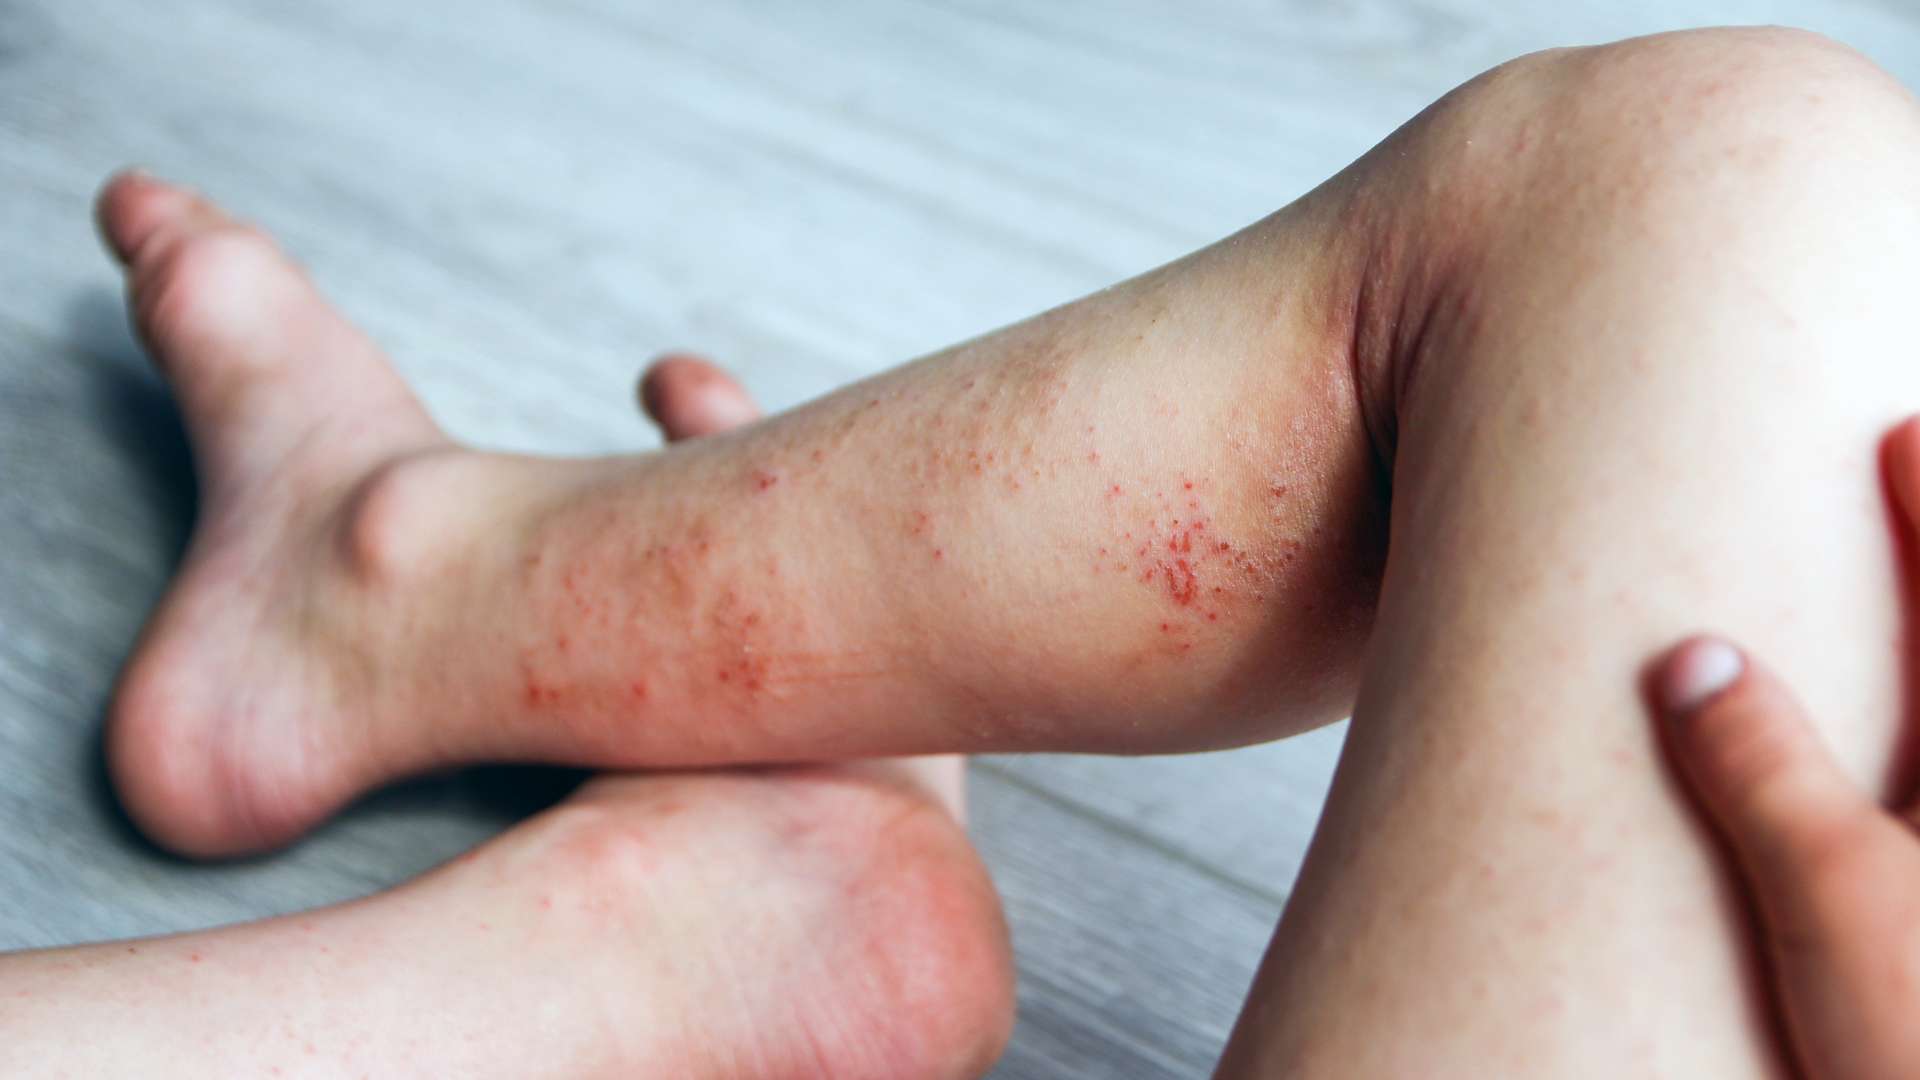 Skin Infections and Irritations